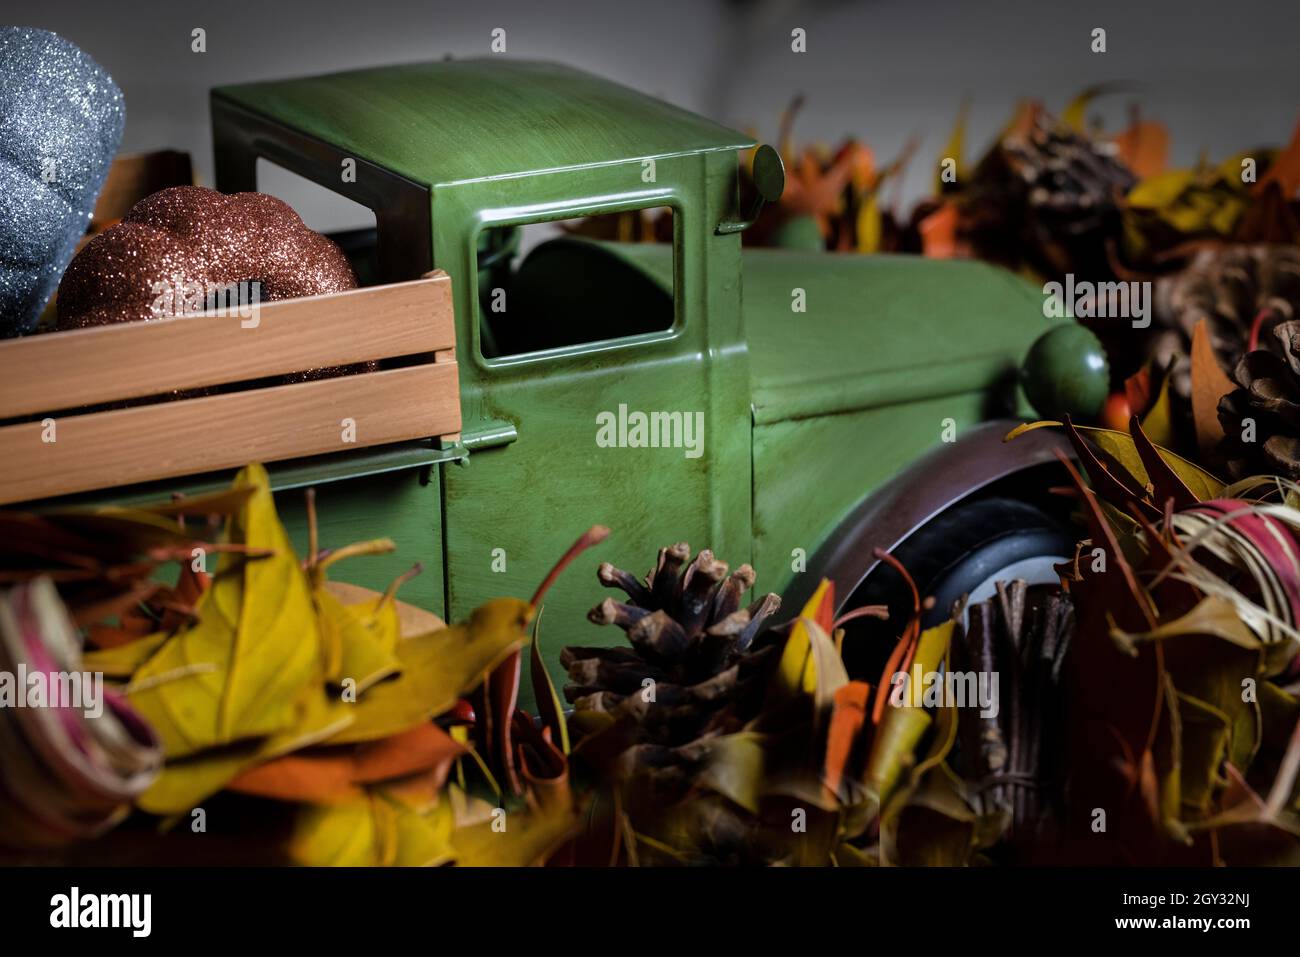 Toy harvest truck and pumpkins home decor surrounded by fall garlland for Halloween or Thanksgiving decorations Stock Photo